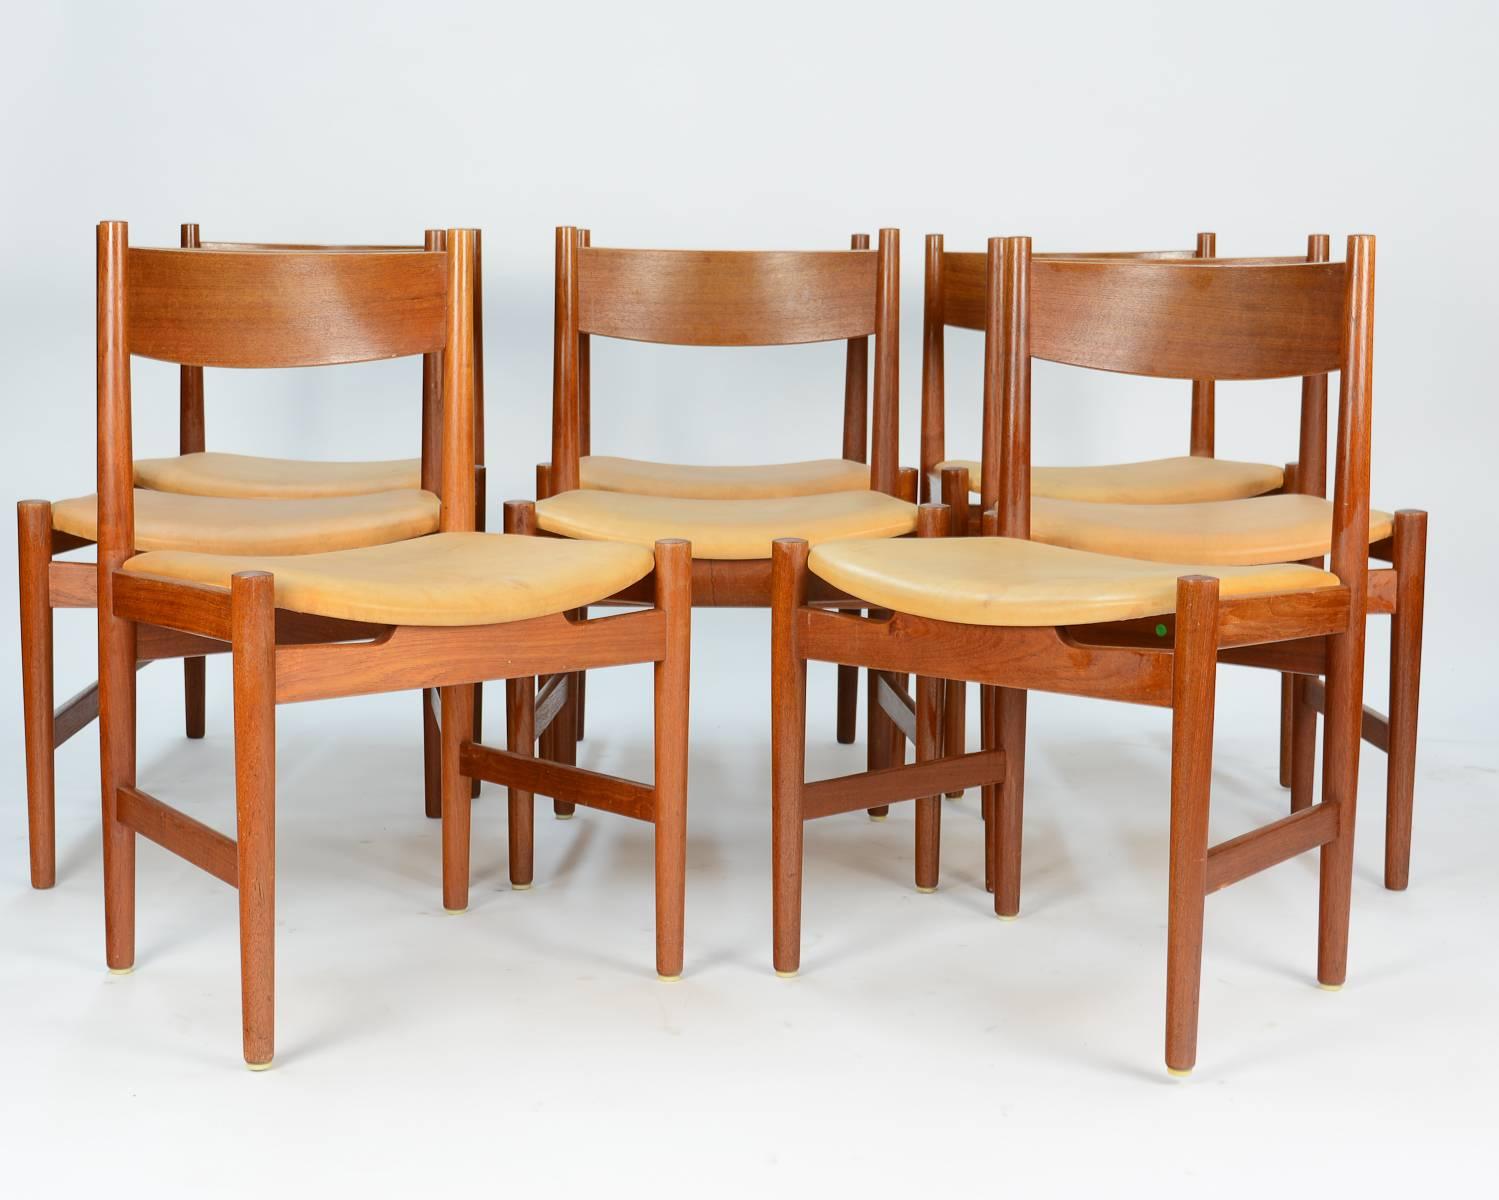 A full set of vintage CH 36 dining chair by Hans Wegner for Carl Hansen. The seats are in destress Danish congac leather. The set is both functional and refined in Classic Wegner design. a wonderful example of Danish modern furniture.